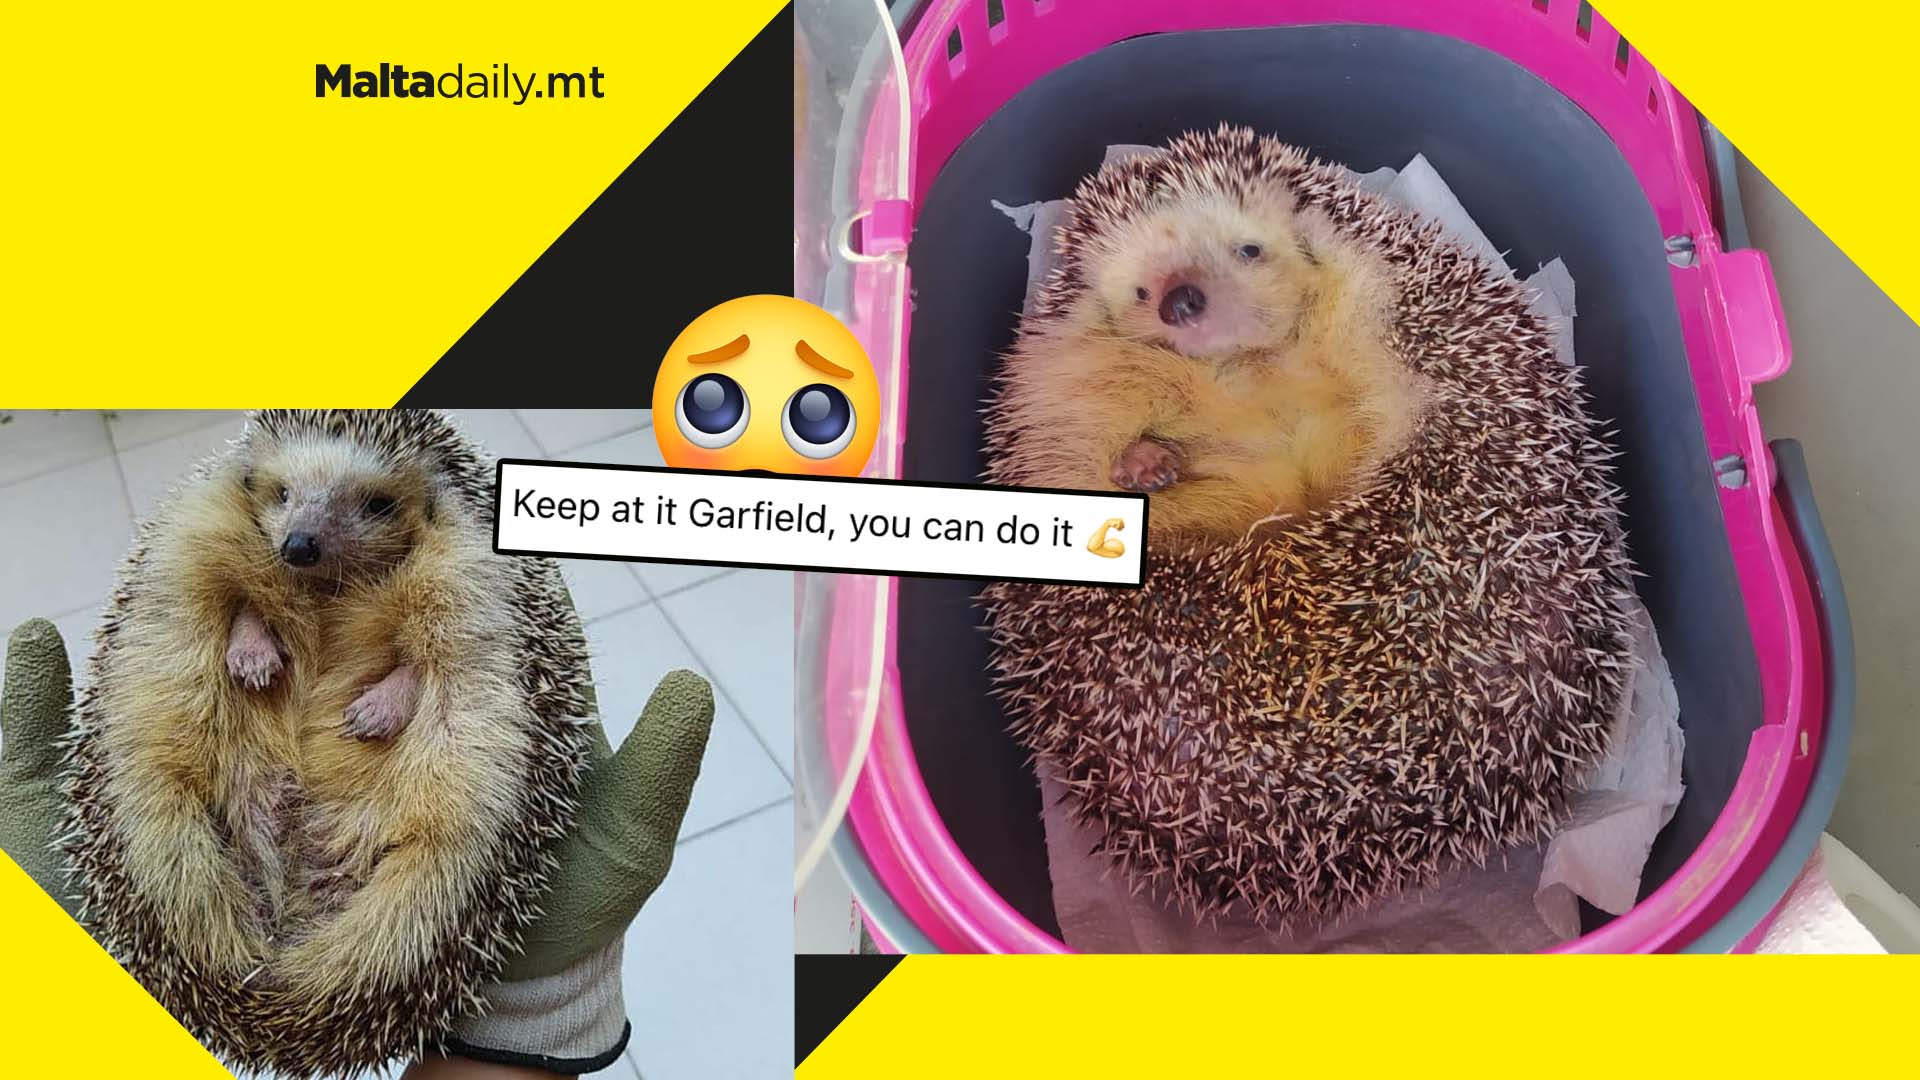 Diet and exercise for Garfield, Malta’s fattest rescued hedgehog